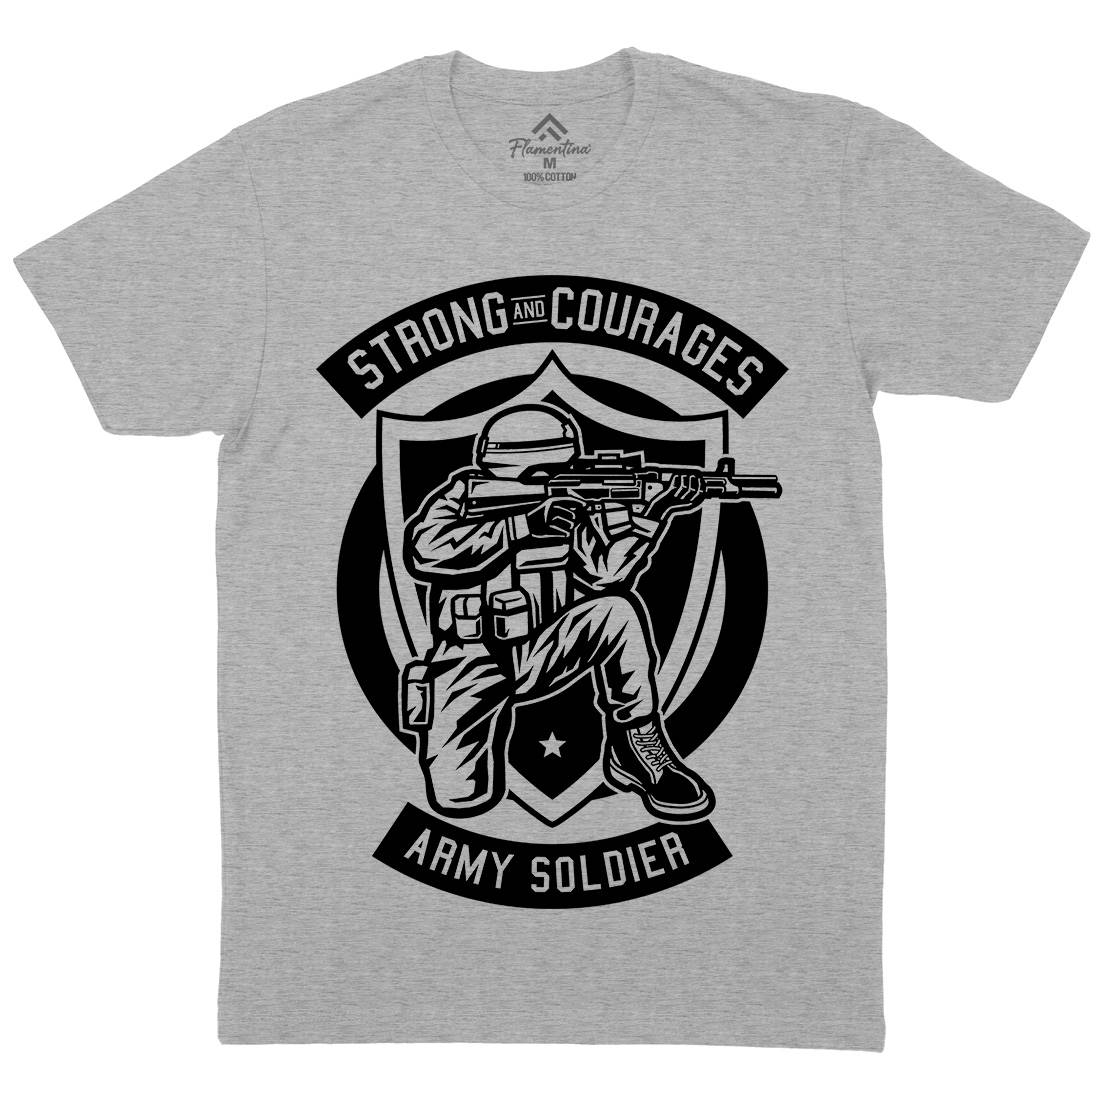 Army Soldier Mens Crew Neck T-Shirt Army B483